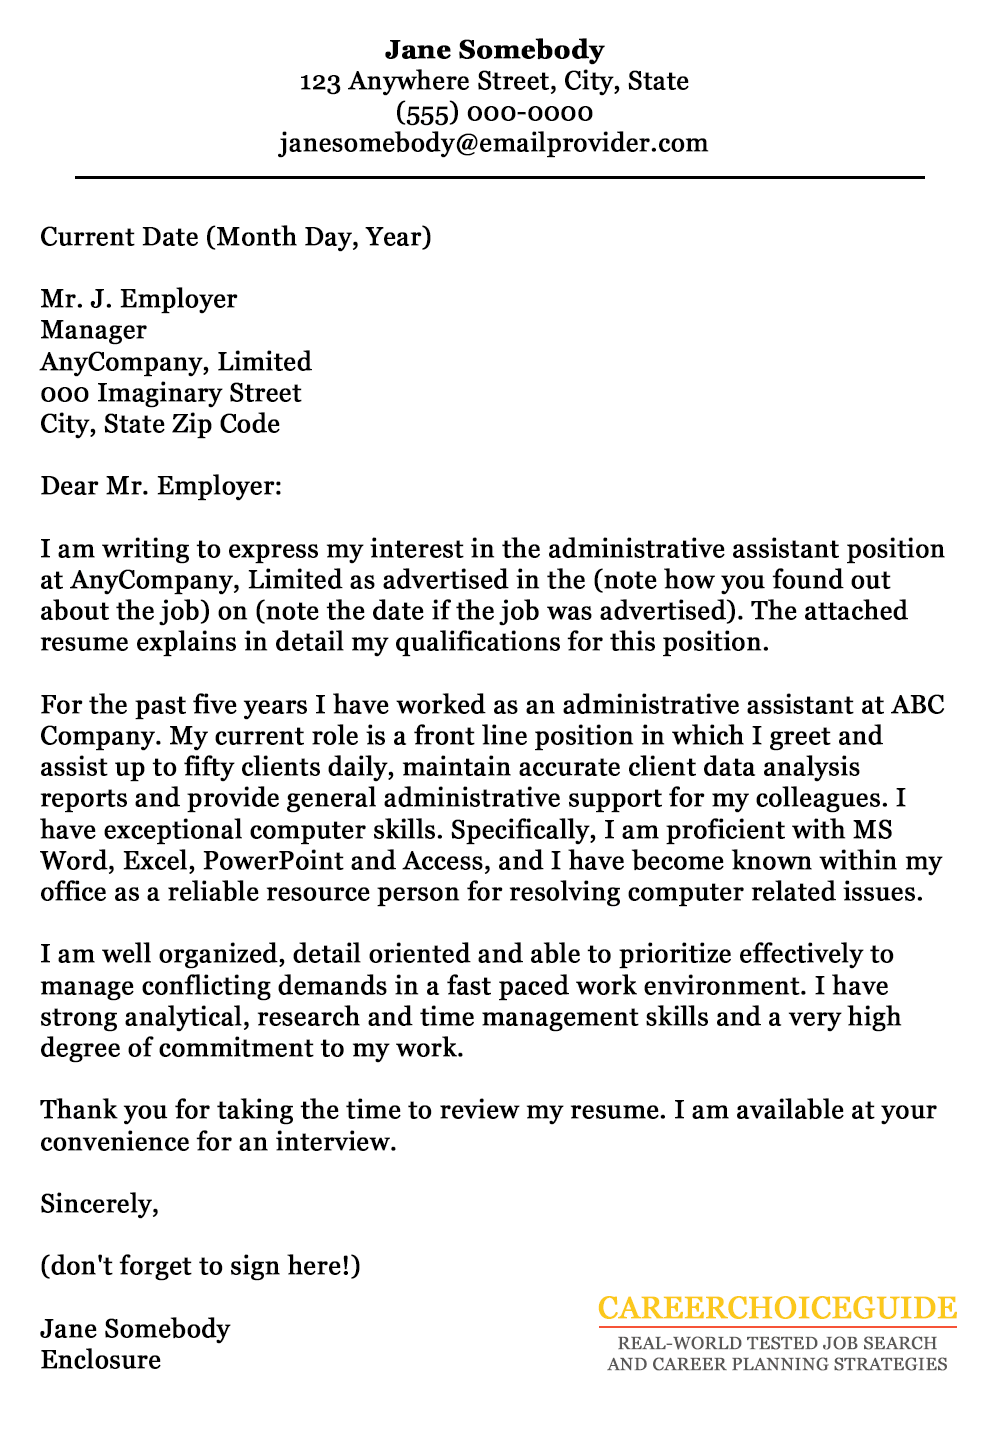 cover letter with qualifications